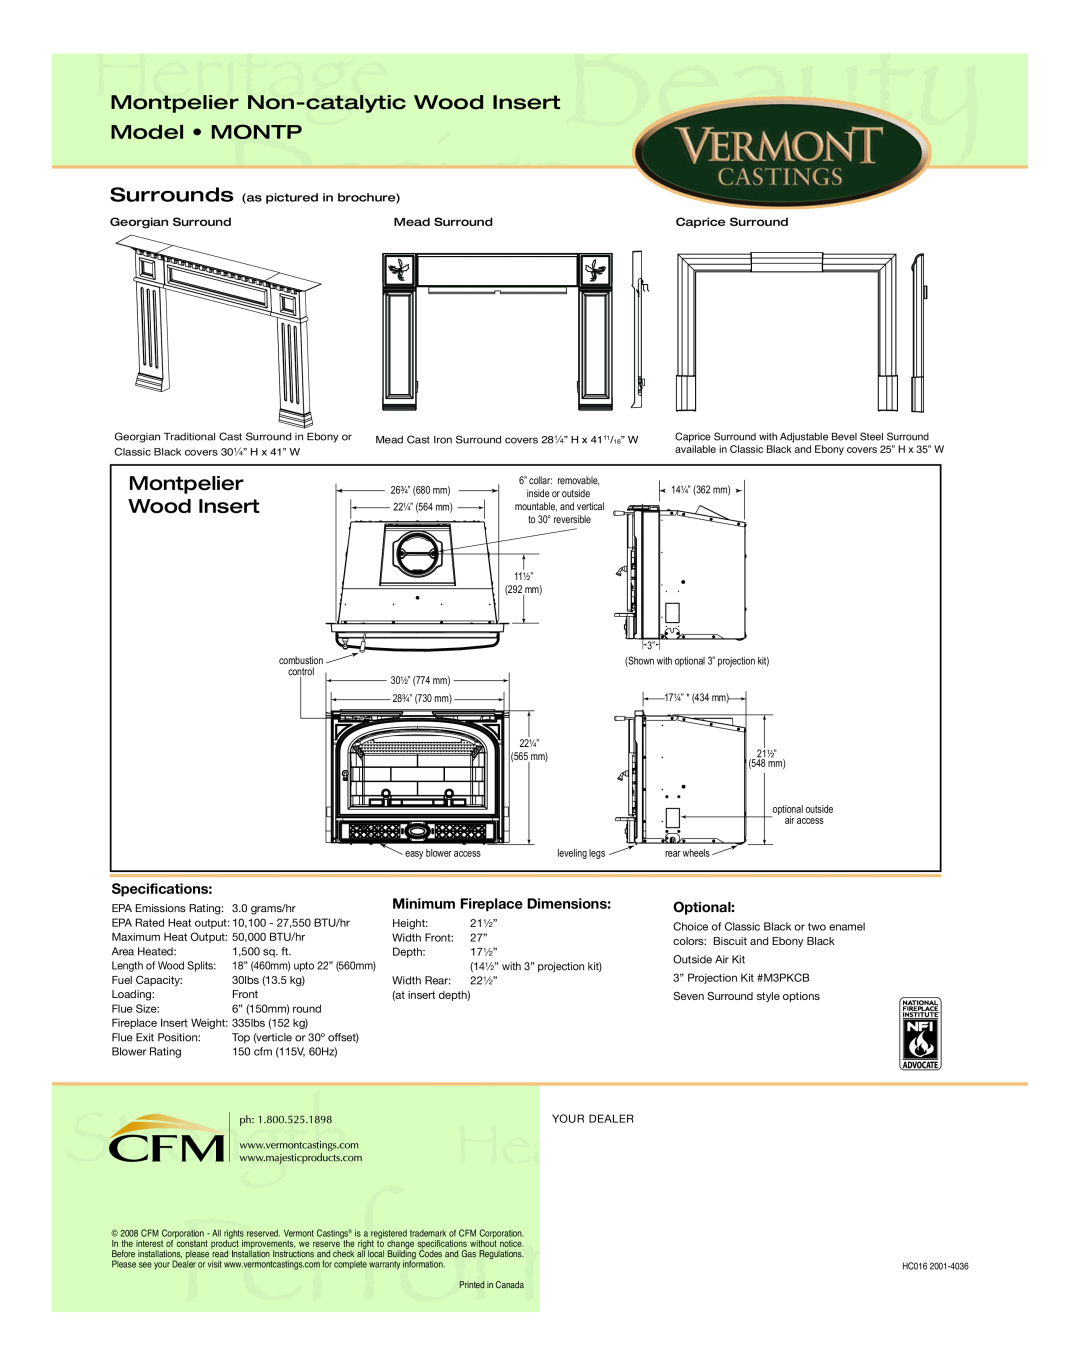 Vermont Casting manual Montpelier Non-catalytic Wood Insert Model MONTP, Specifications, Minimum Fireplace Dimensions 